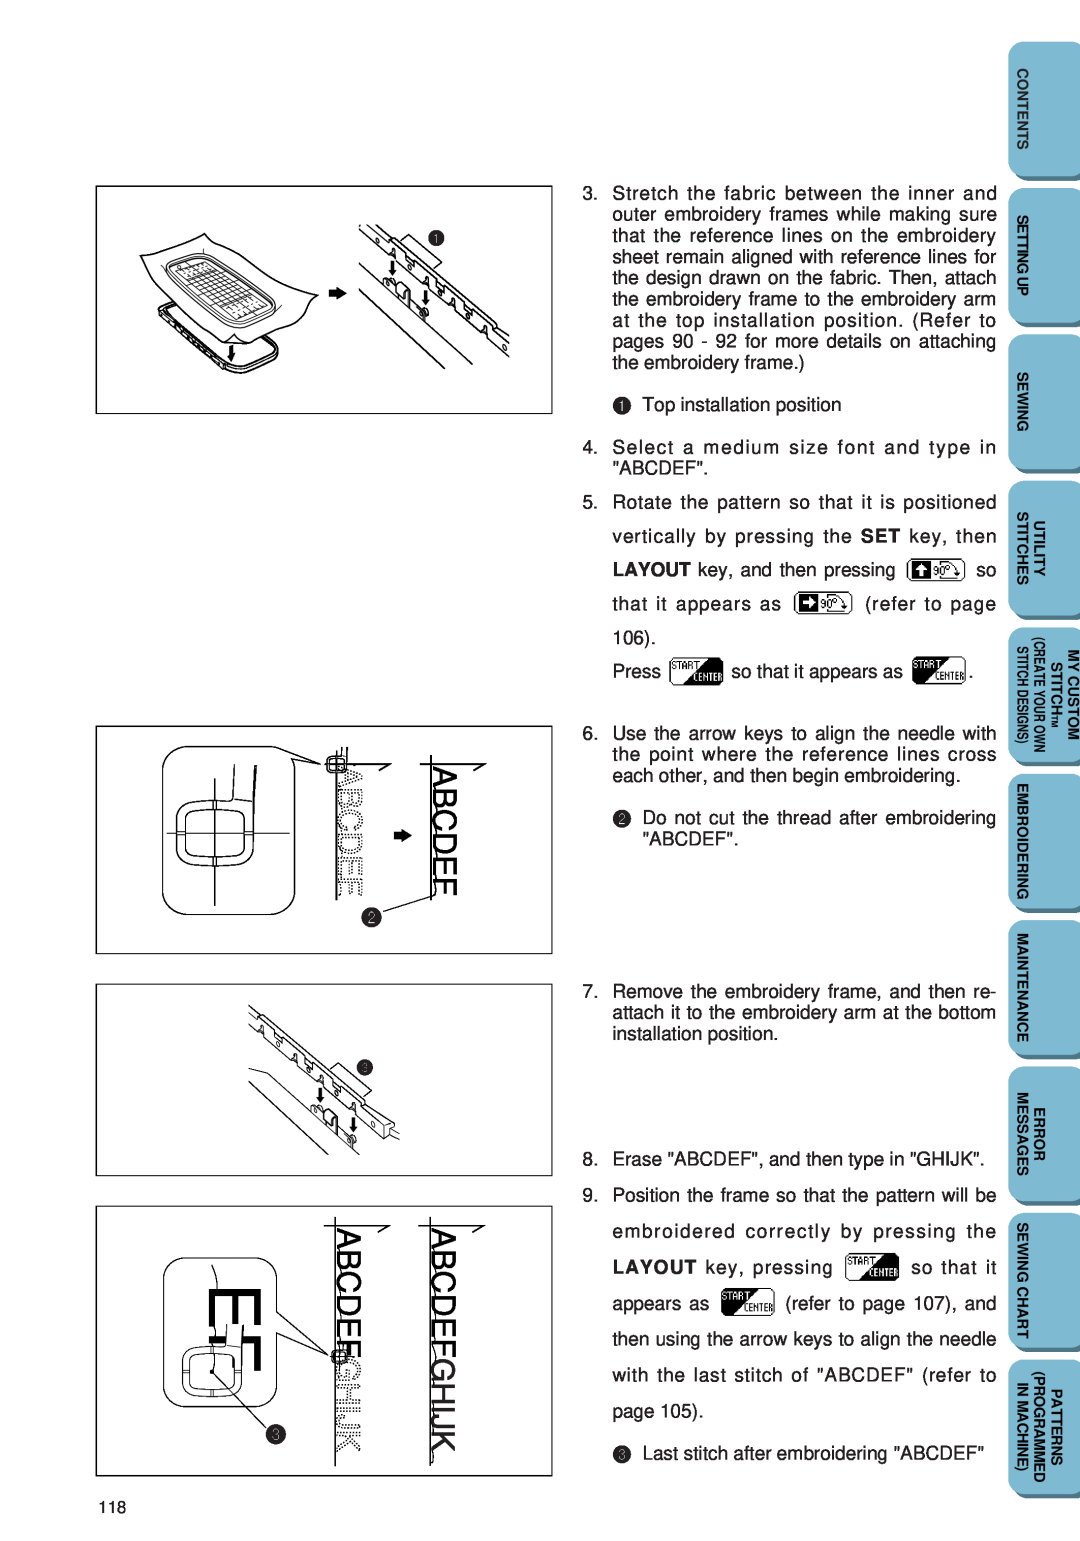 Brother PC 6500 operation manual Top installation position 